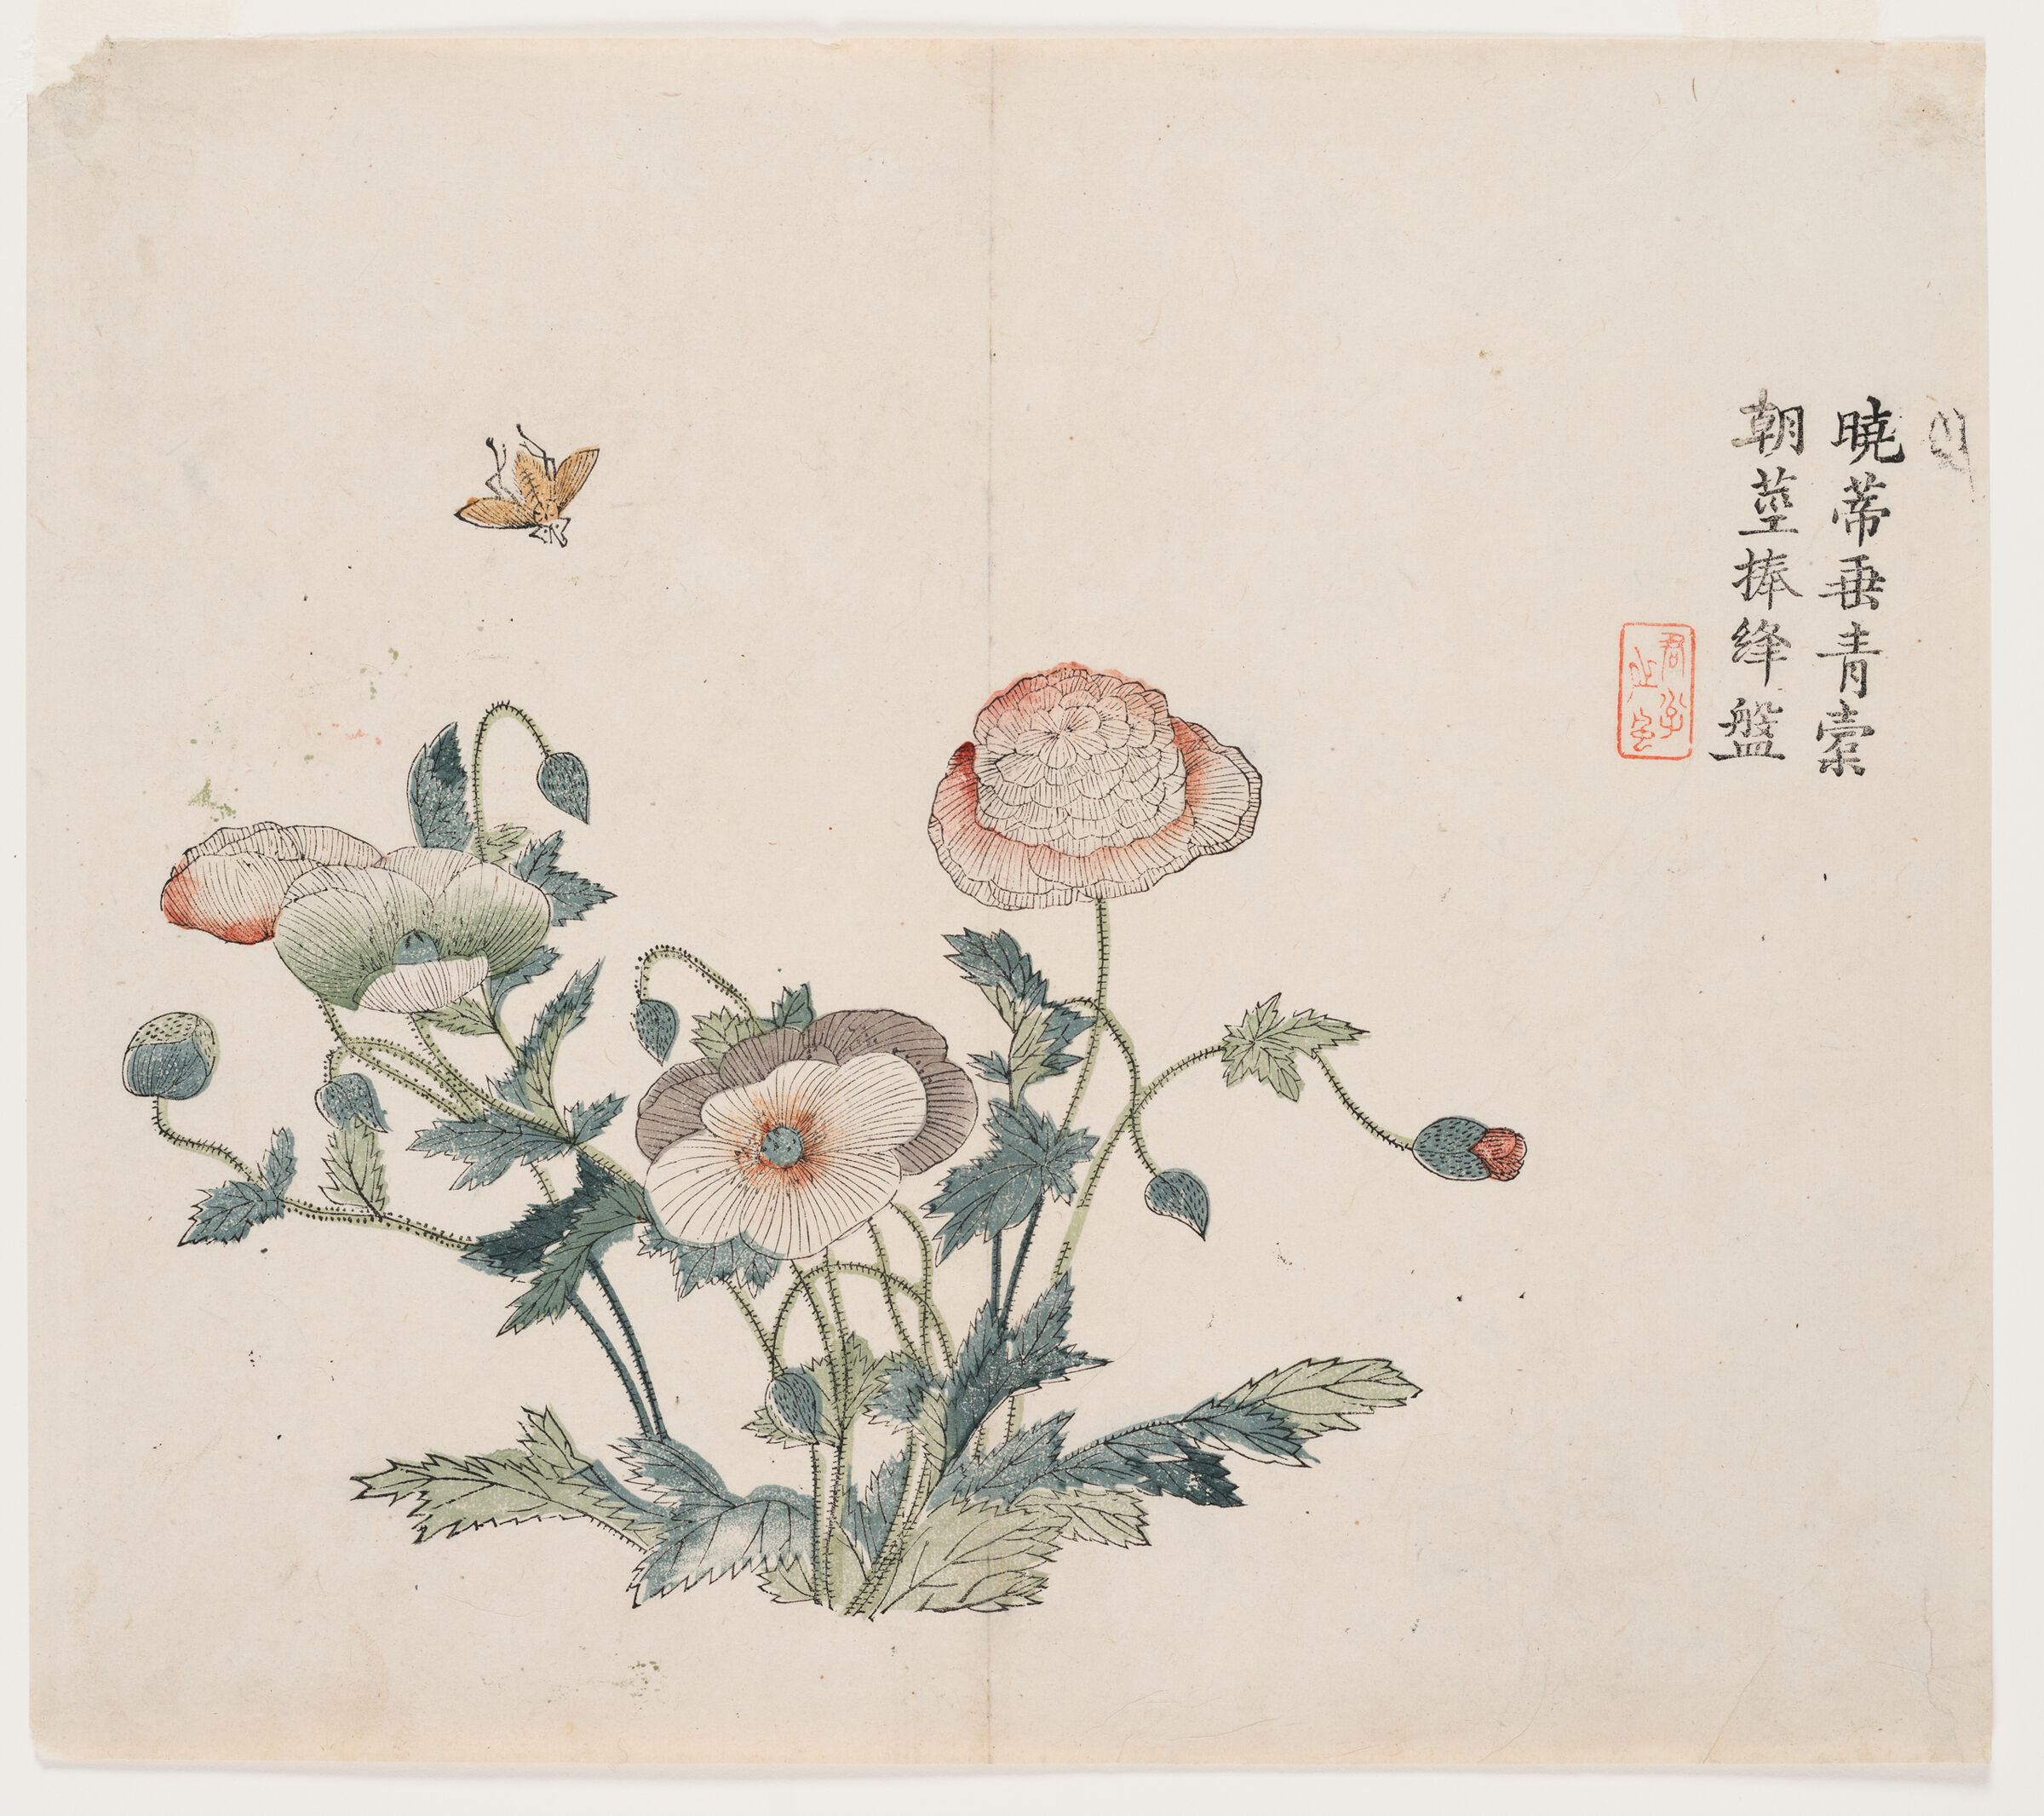 A color print shows a flowering poppy plant with an insect hovering above; Chinese writing and a seal are to the right.